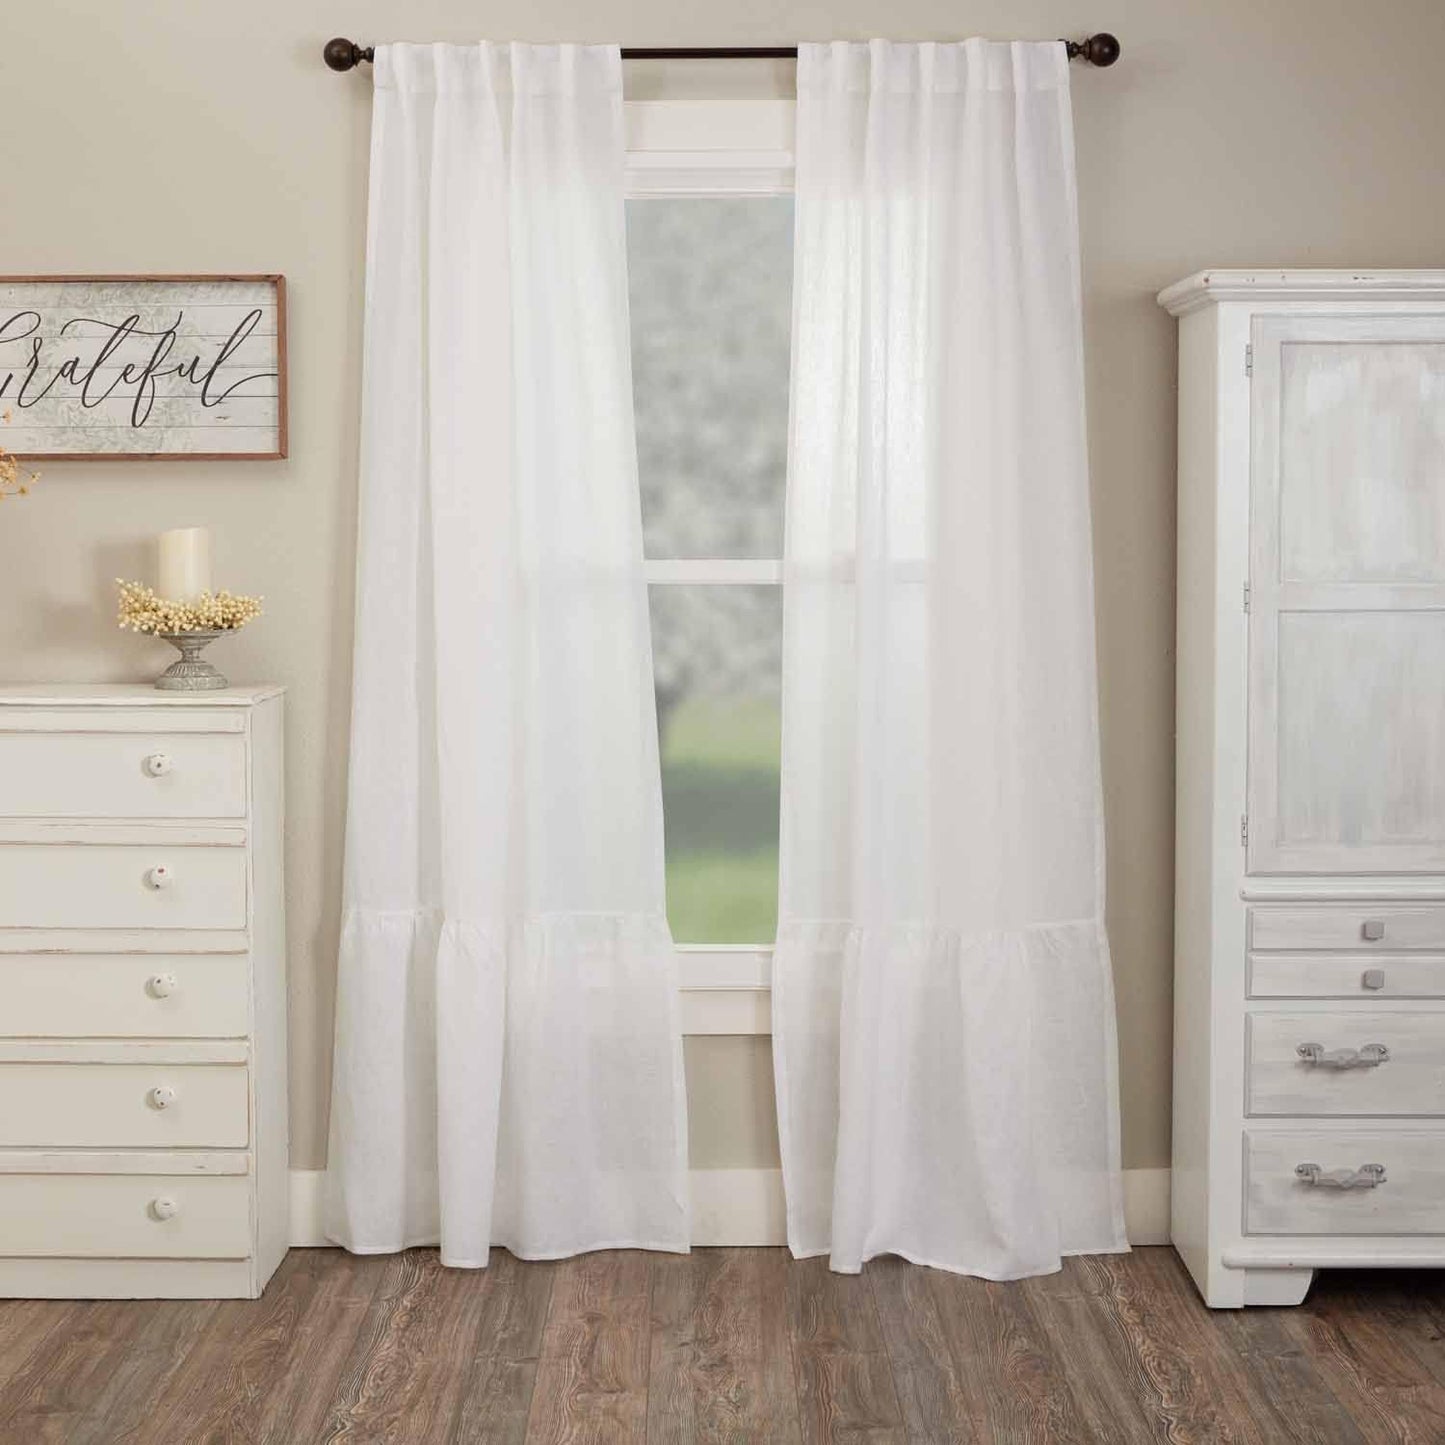 Piper Classics Provincial Linen White Ruffled Panel Curtains, Set of 2 Panels, 84" Long X 40" W, 100% Linen Drapes  Piper Classics 96" Panel Set  